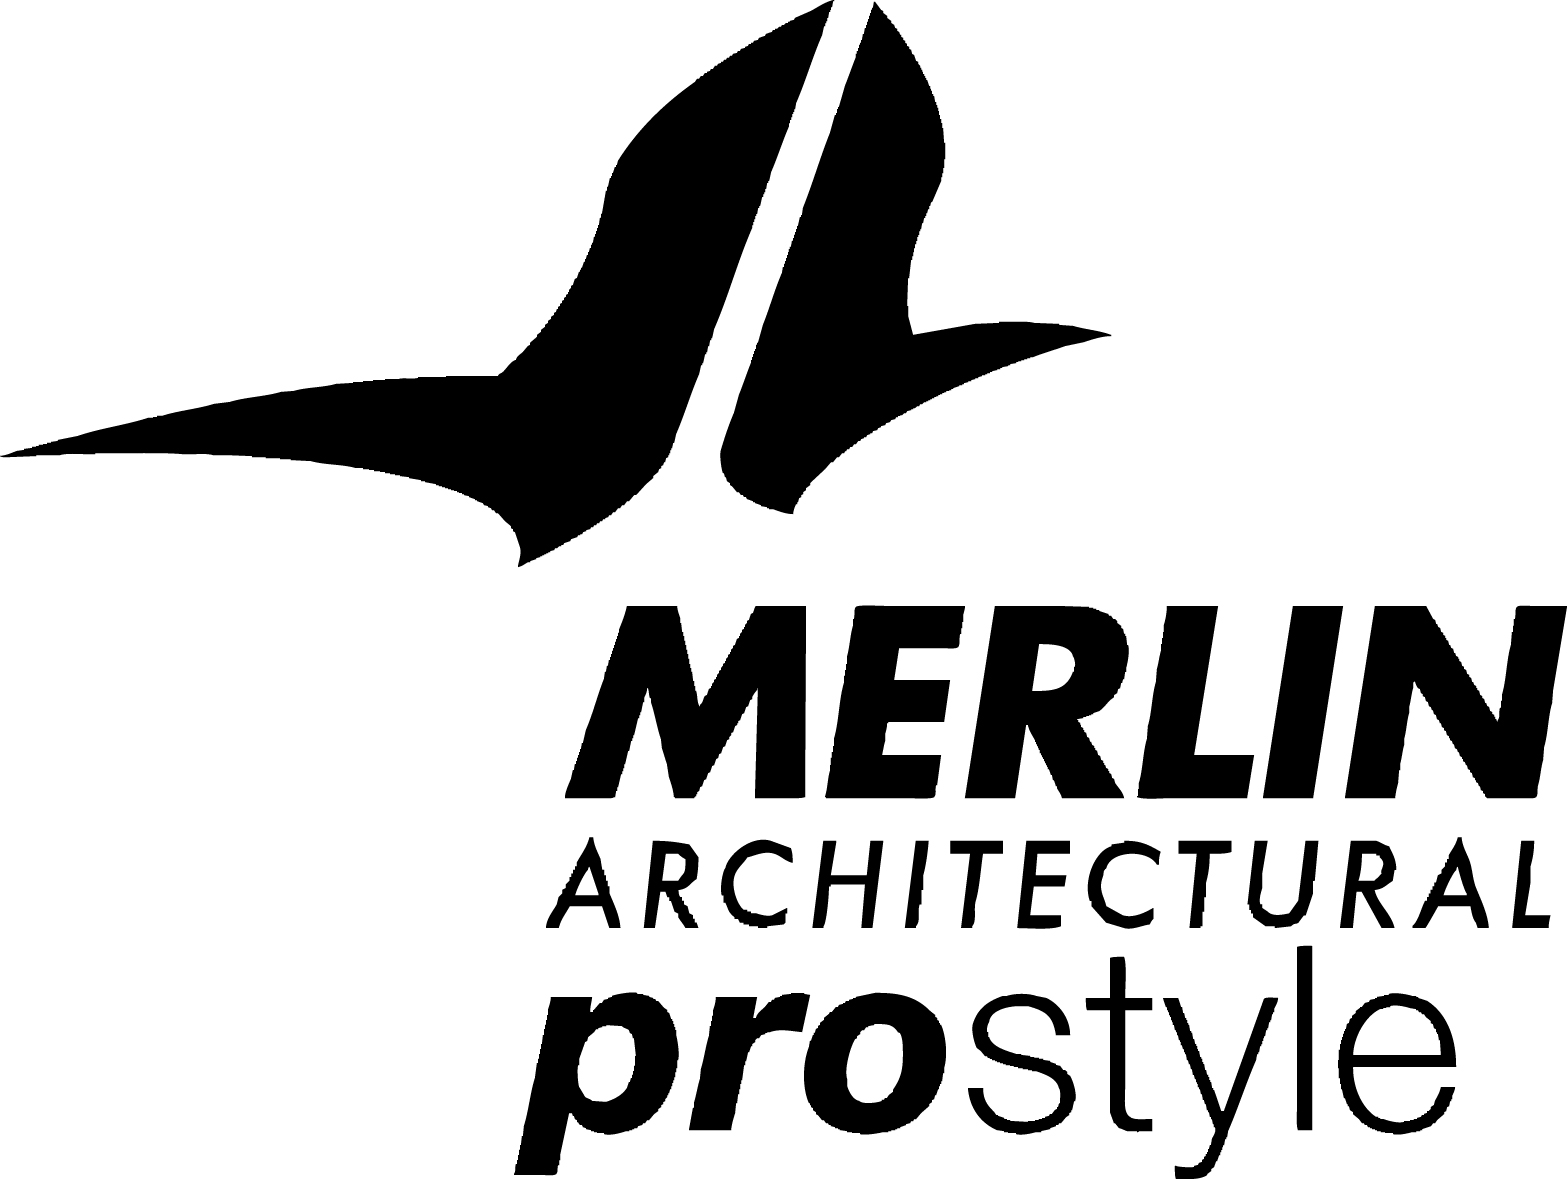 Merlin Architectural Limited